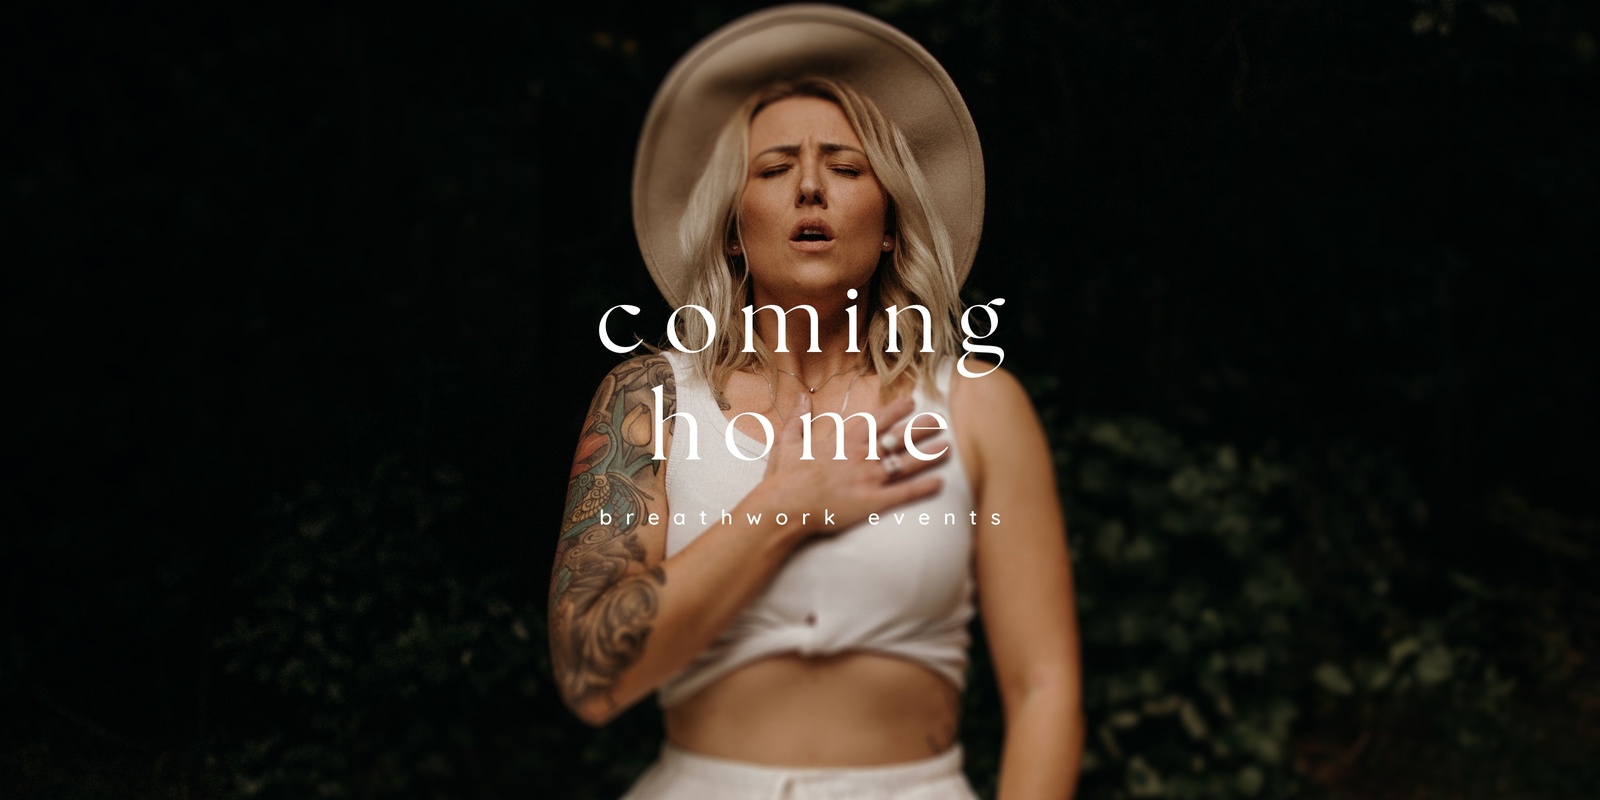 Banner image for Coming home - Breathwork event